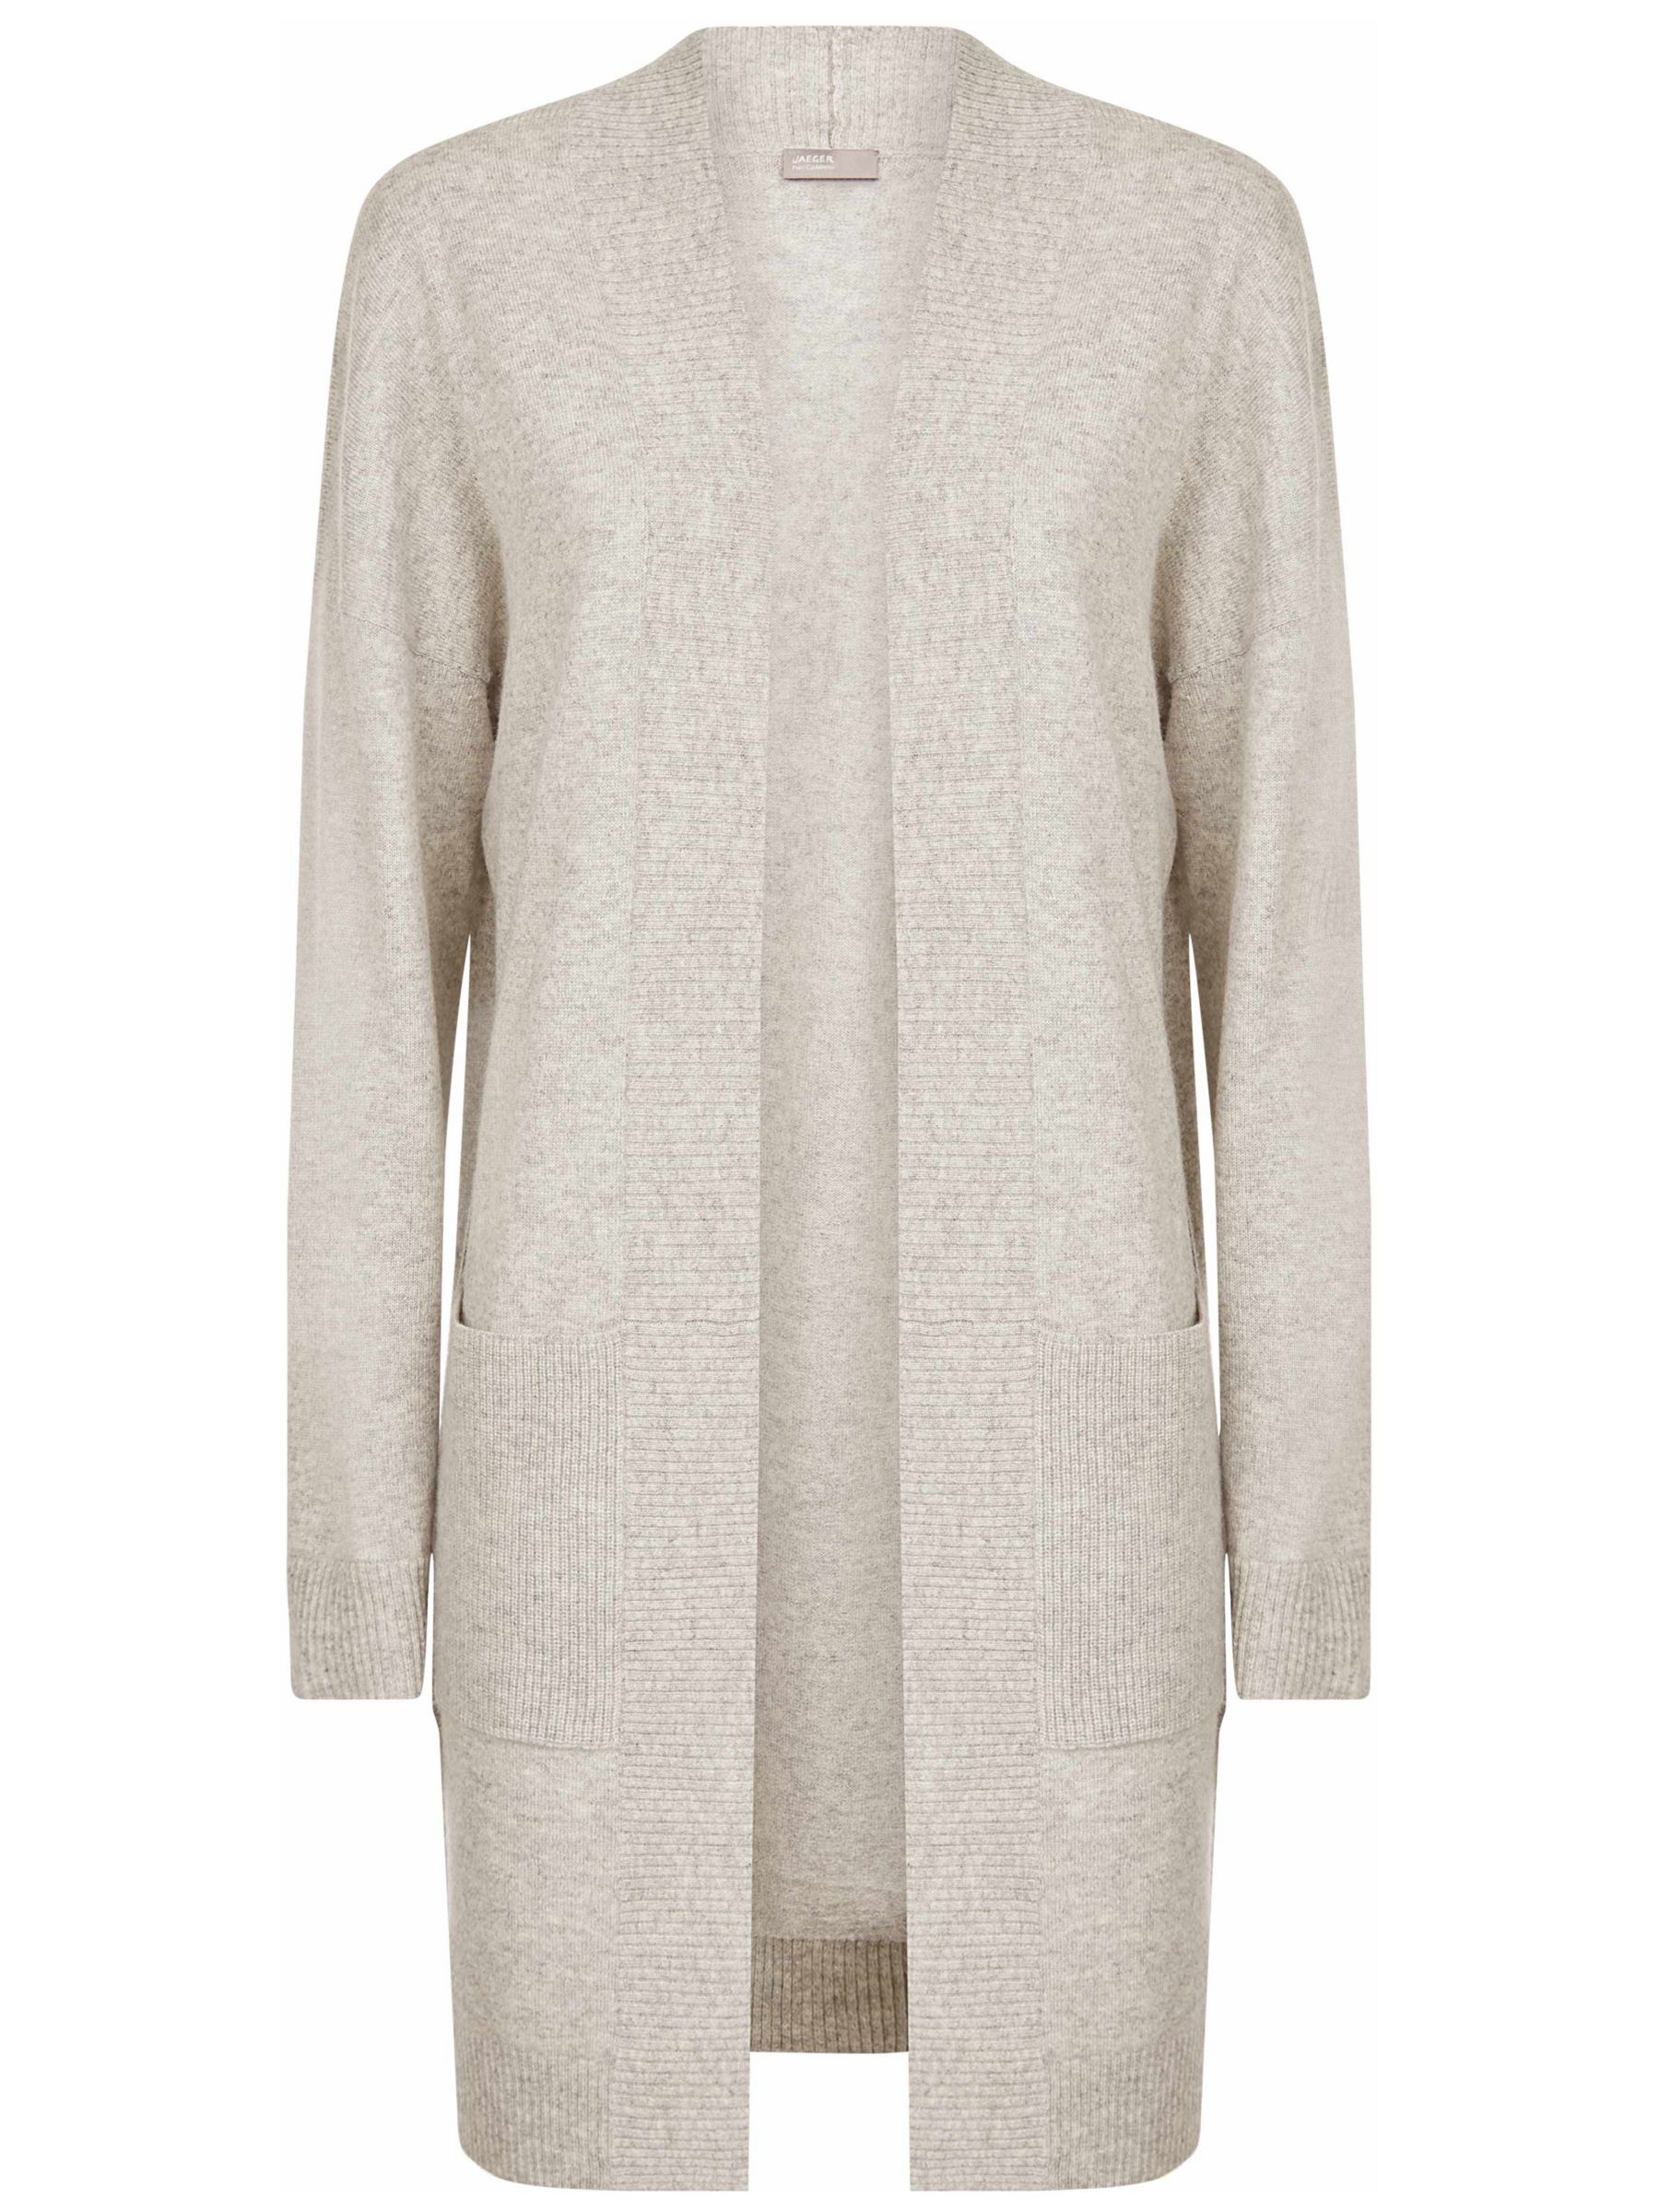 Jaeger Cashmere Long Slouchy Cardigan